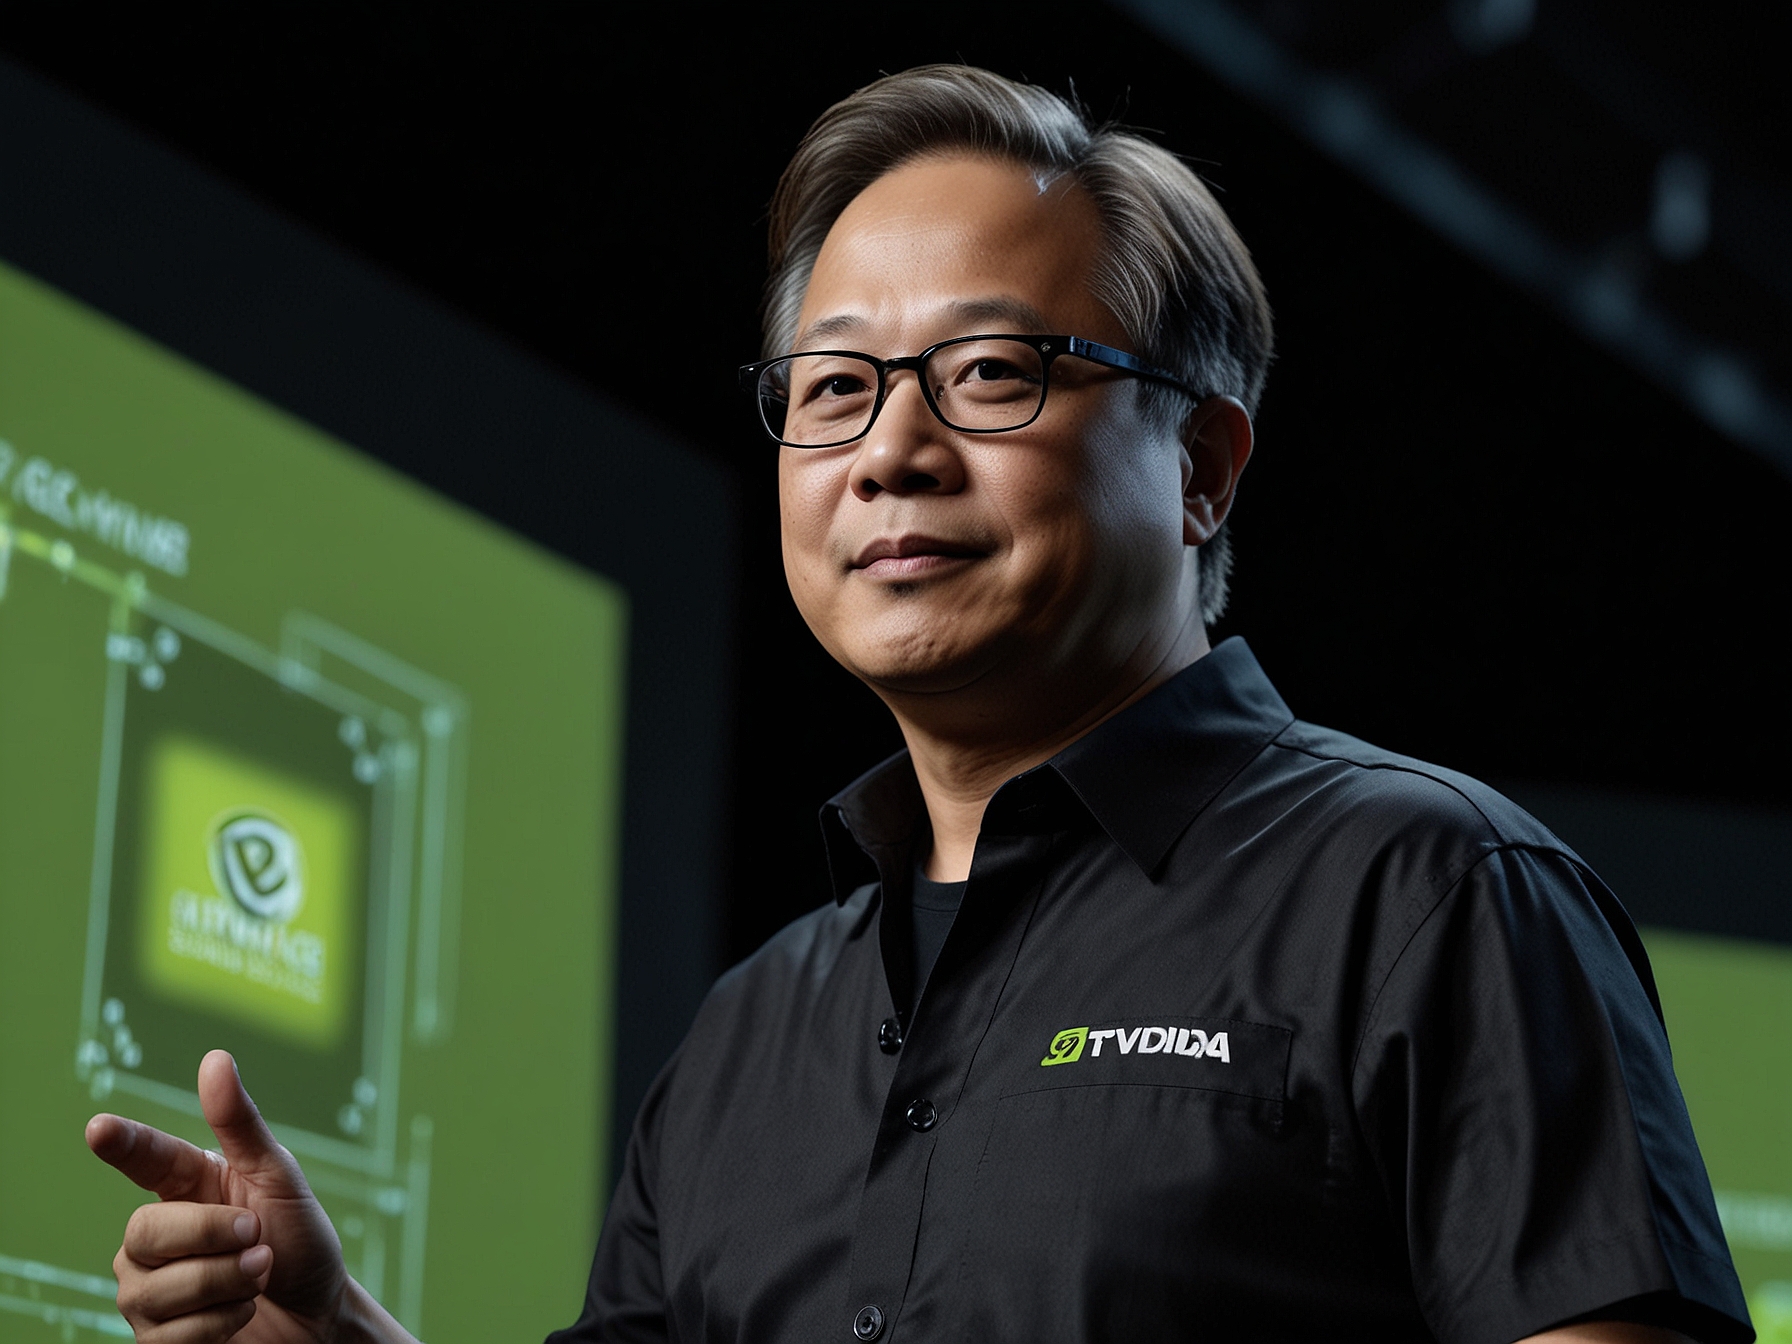 Illustration of Nvidia's CEO Jensen Huang presenting new innovations. Nvidia's cutting-edge GPUs and diversified products in AI, data centers, and autonomous vehicles signify its growth potential.